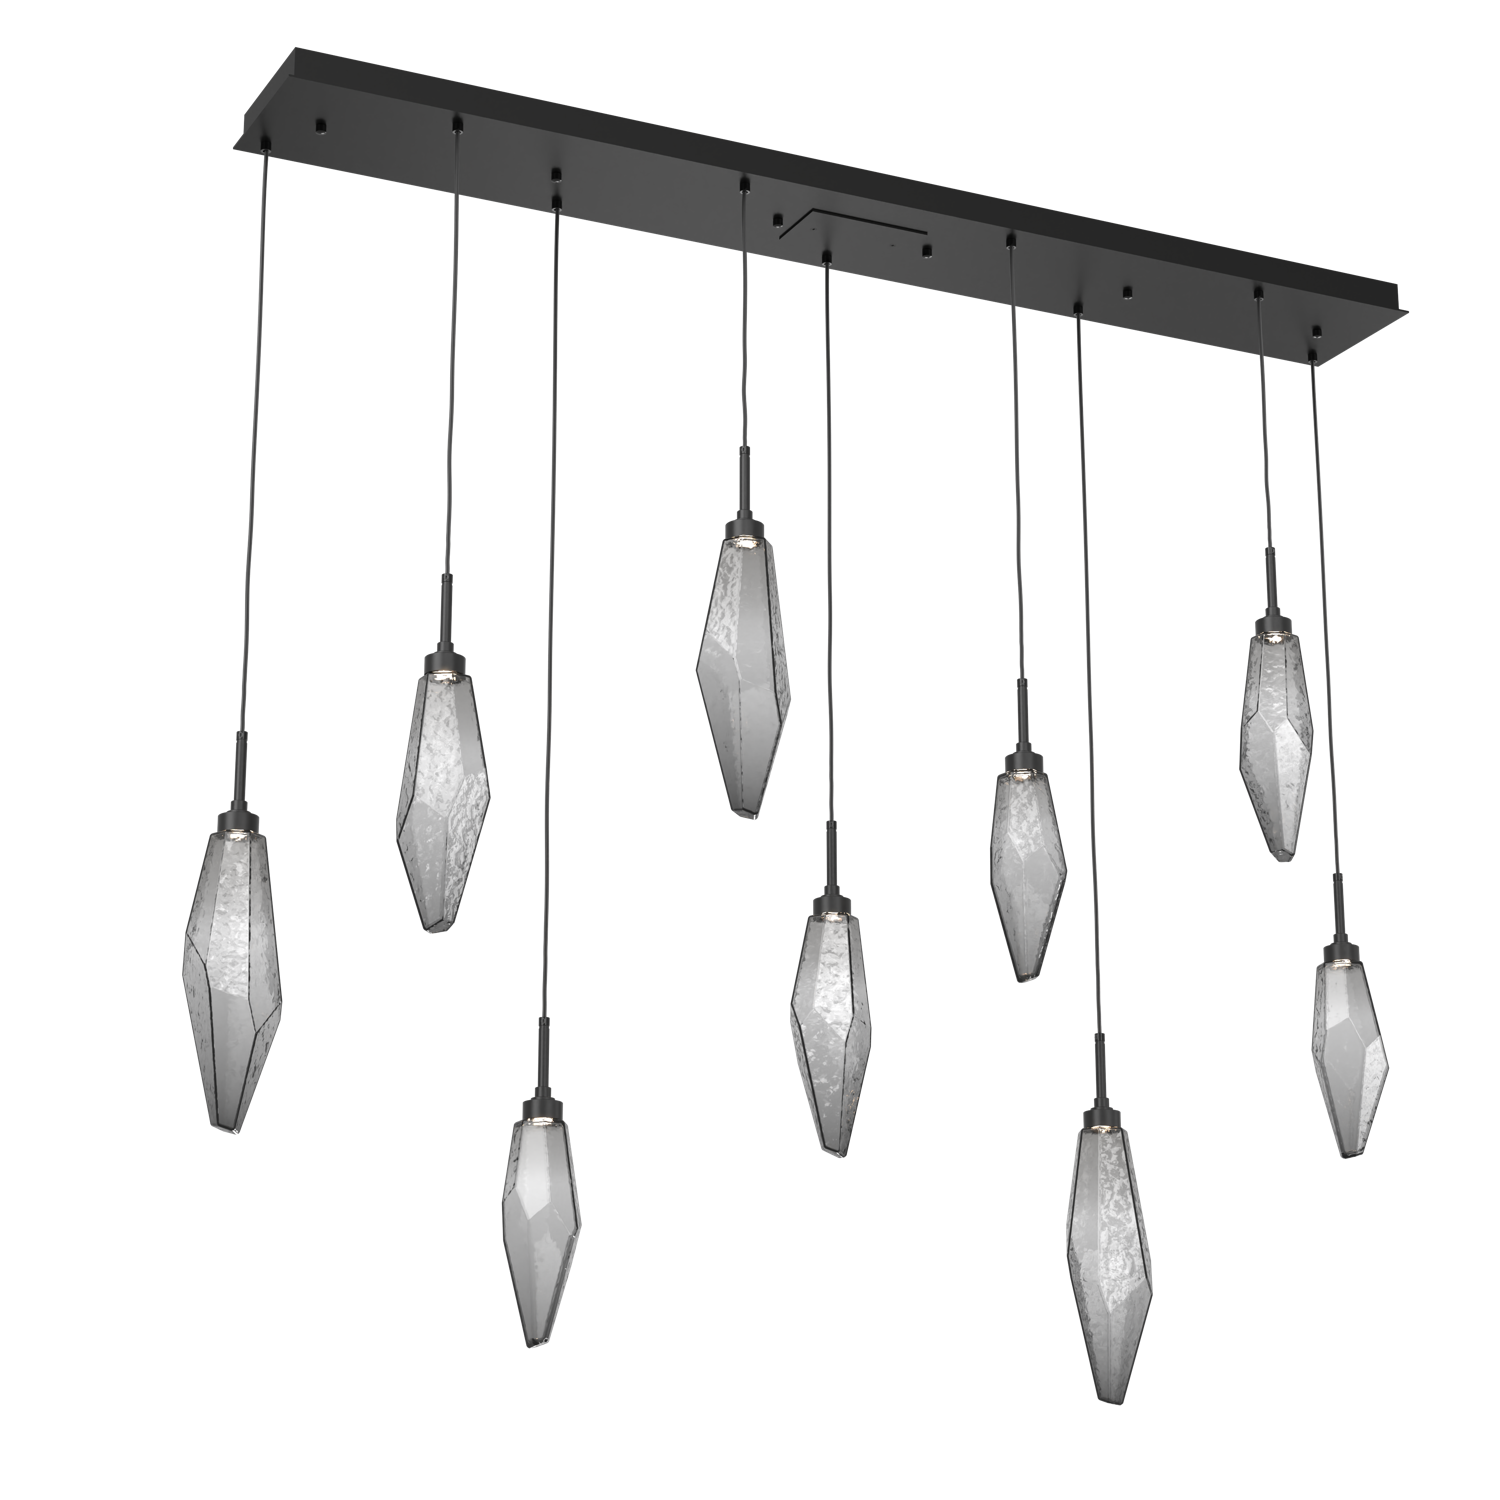 PLB0050-09-MB-CS-Hammerton-Studio-Rock-Crystal-9-light-linear-pendant-chandelier-with-matte-black-finish-and-chilled-smoke-glass-shades-and-LED-lamping